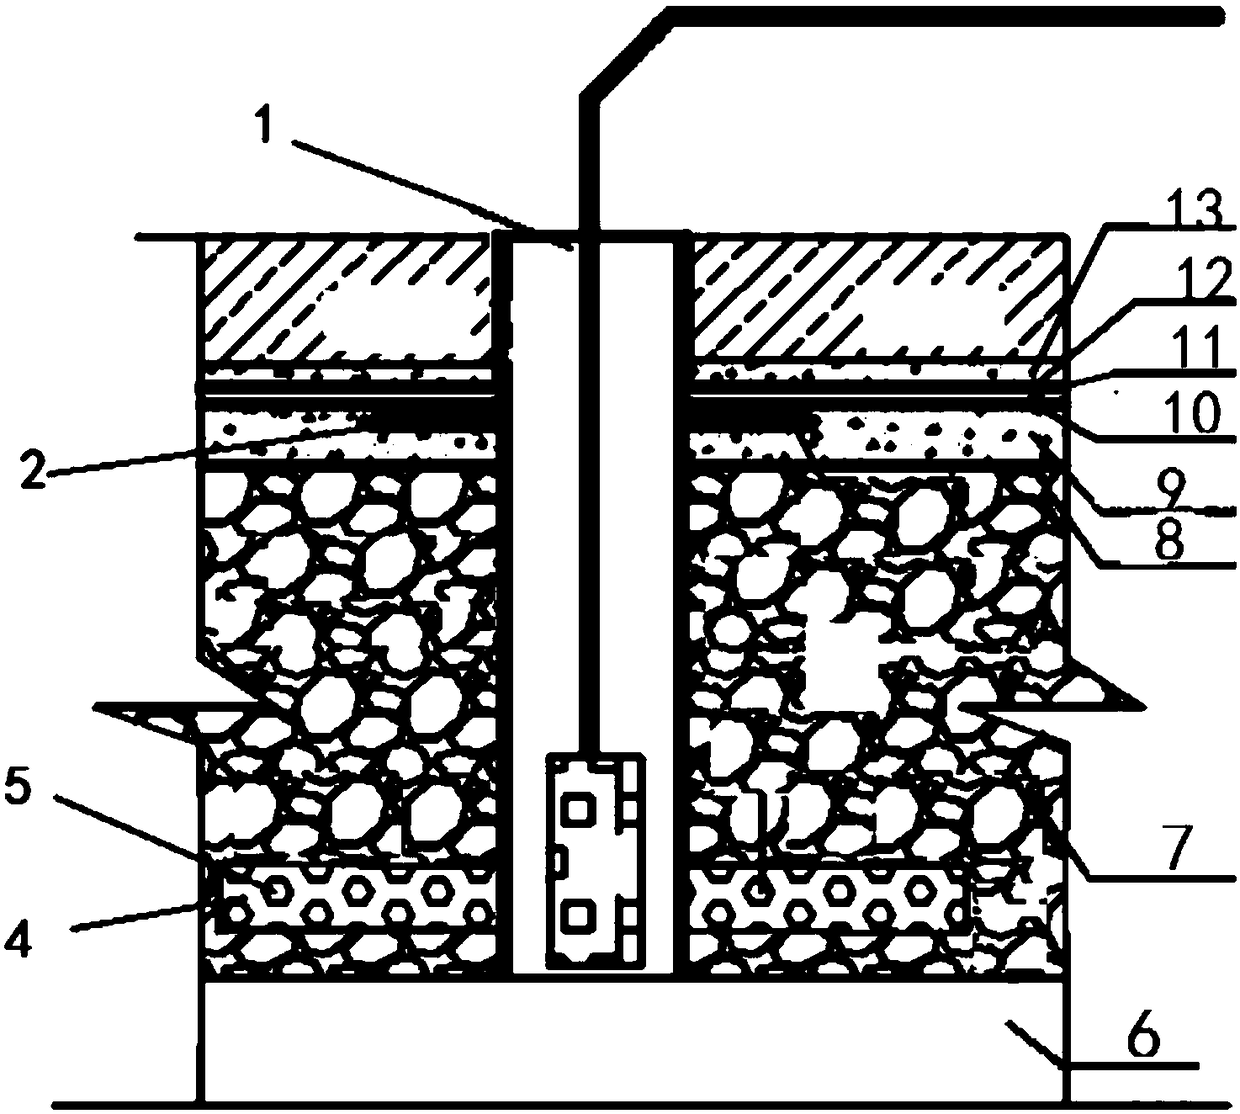 Embedded type superficial layer combination drainage pipe and construction method